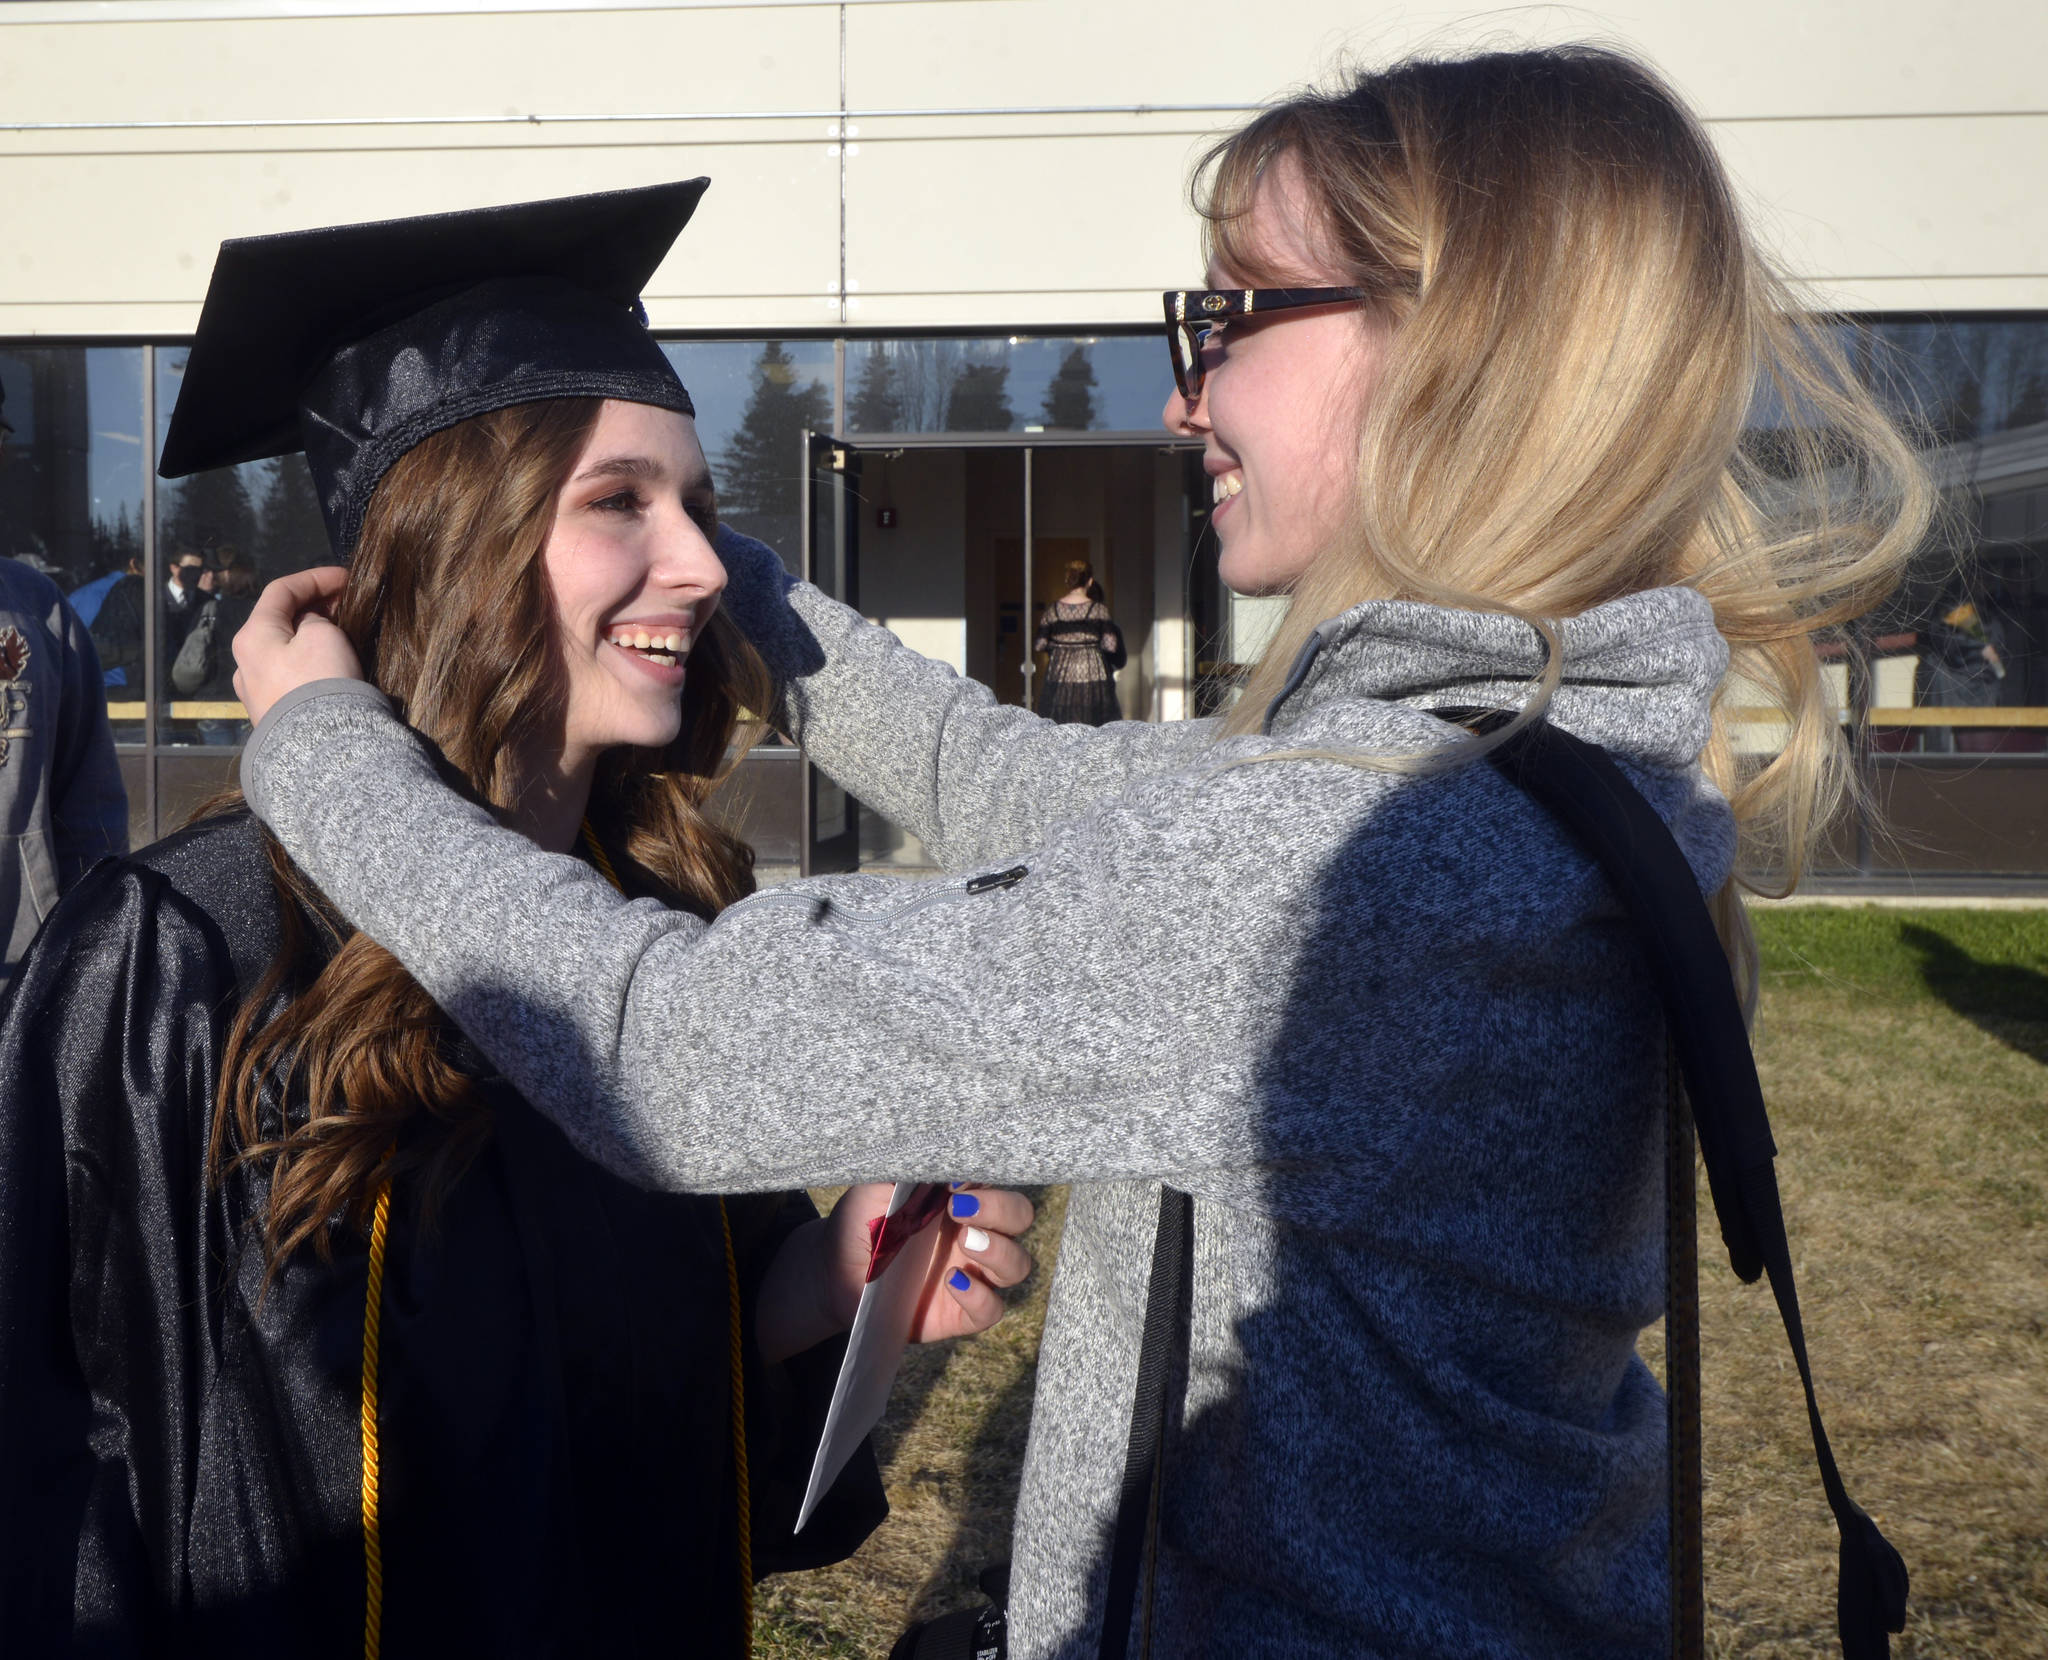 LeAnna Hobby, right, adjusts Allison Bushnell’s cap before taking photos following the Kenai Peninsula College graduation Thursday, May 11, 2017 at Ren&